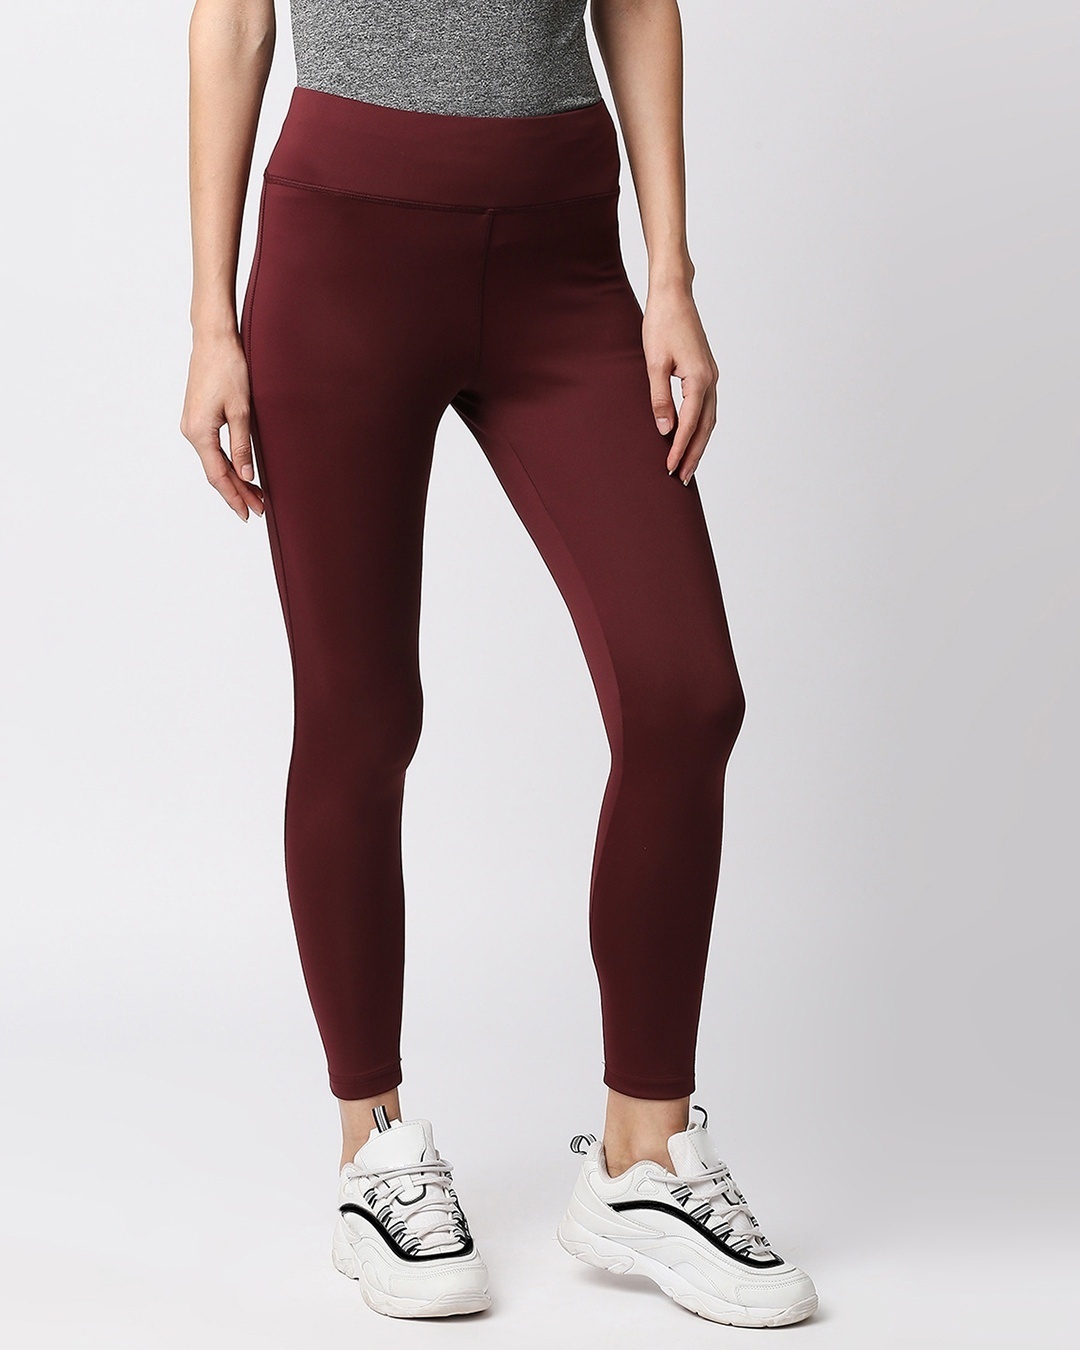 Shop Women's Maroon Casual Tights-Back